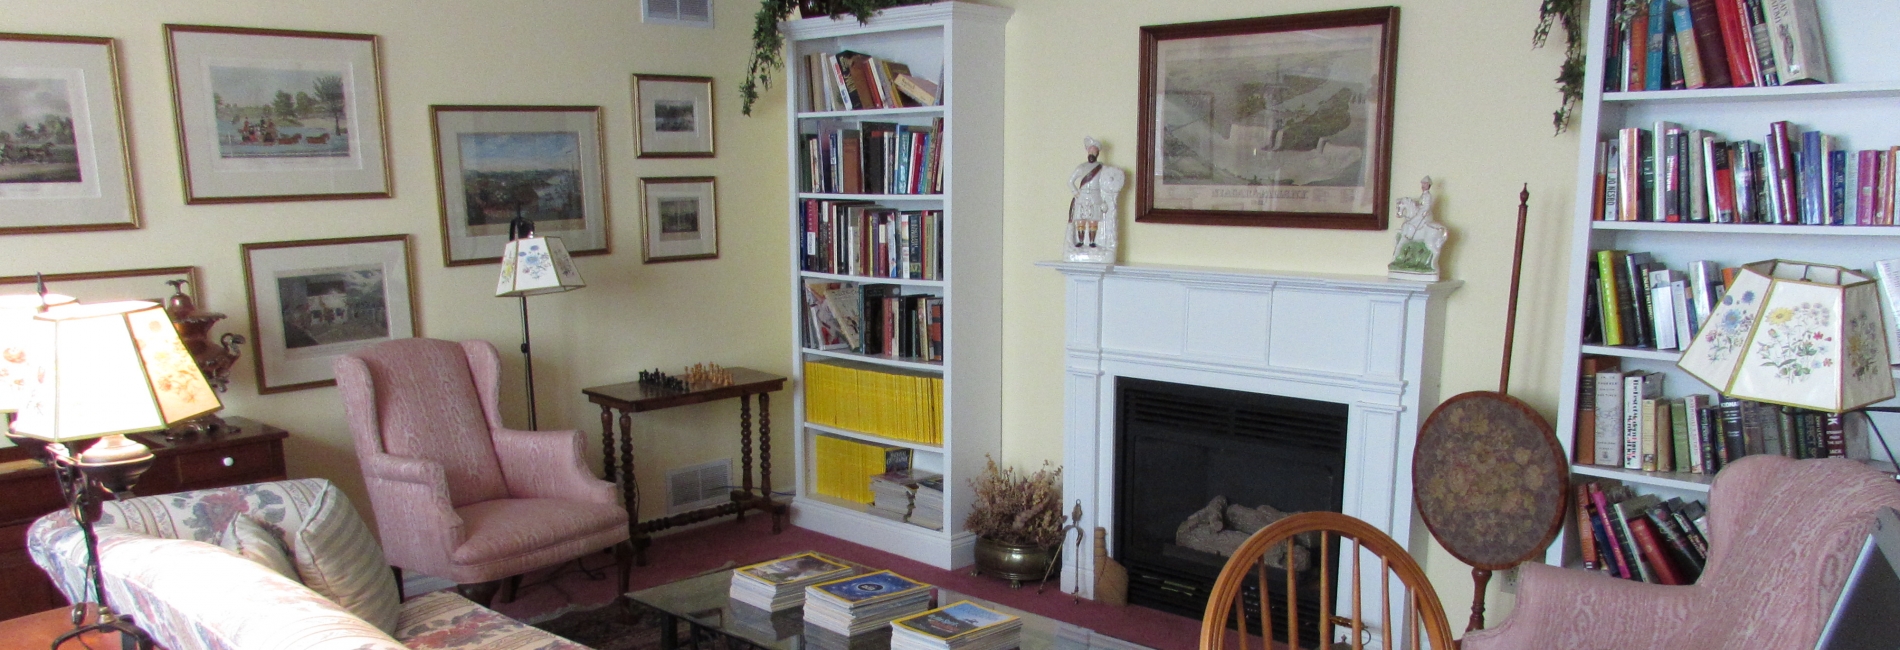 Blairpen House Country Inn Library